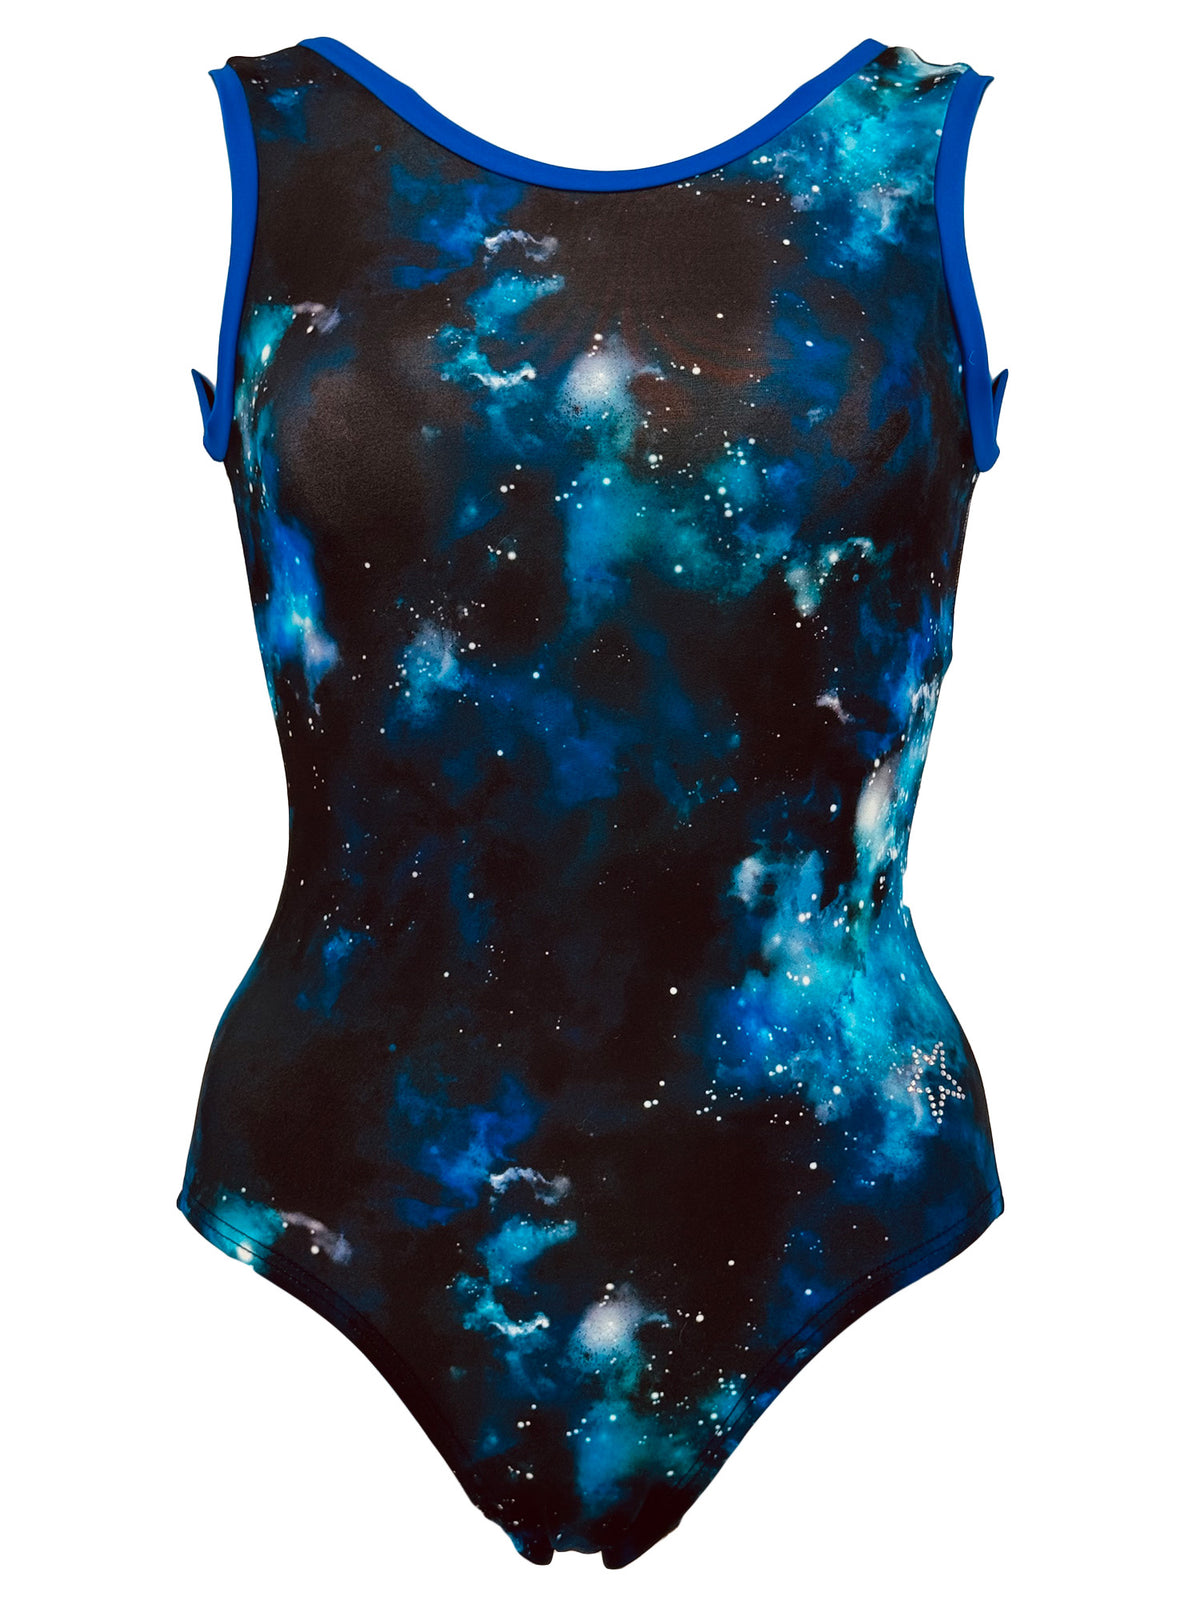 Tank style leotard front view with a image of the galaxy